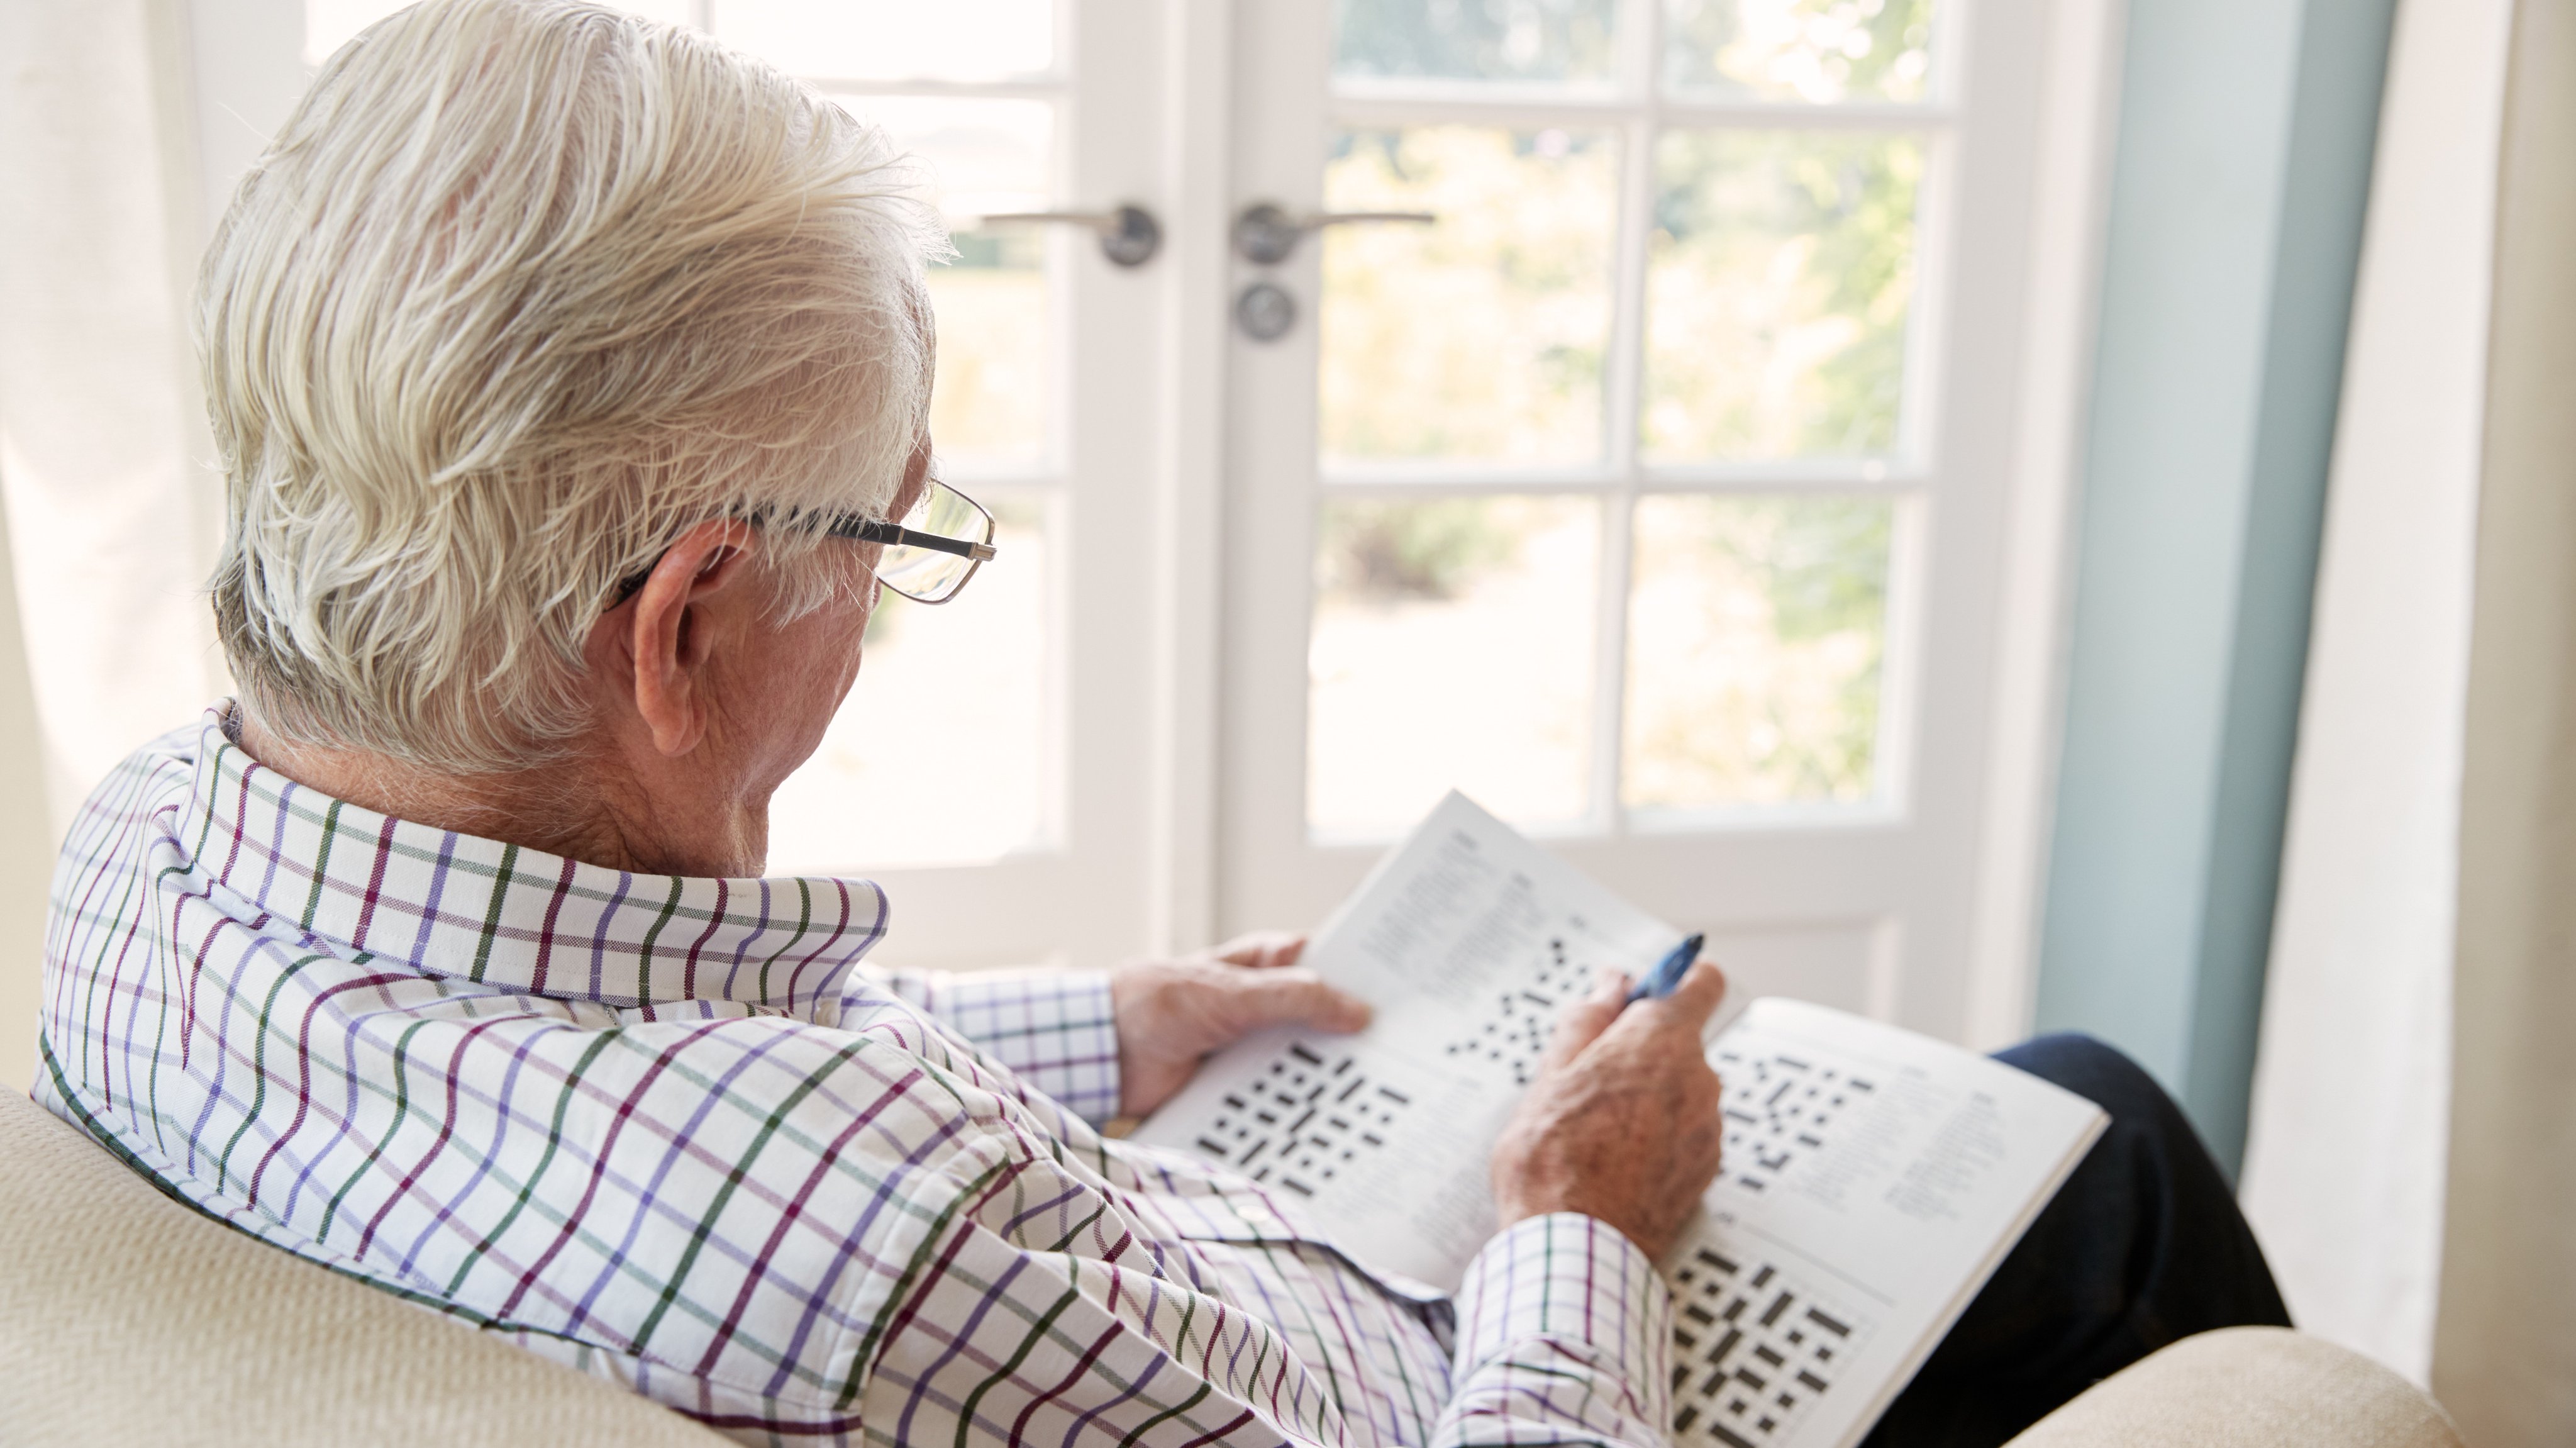 An older adult working on a crossword puzzle